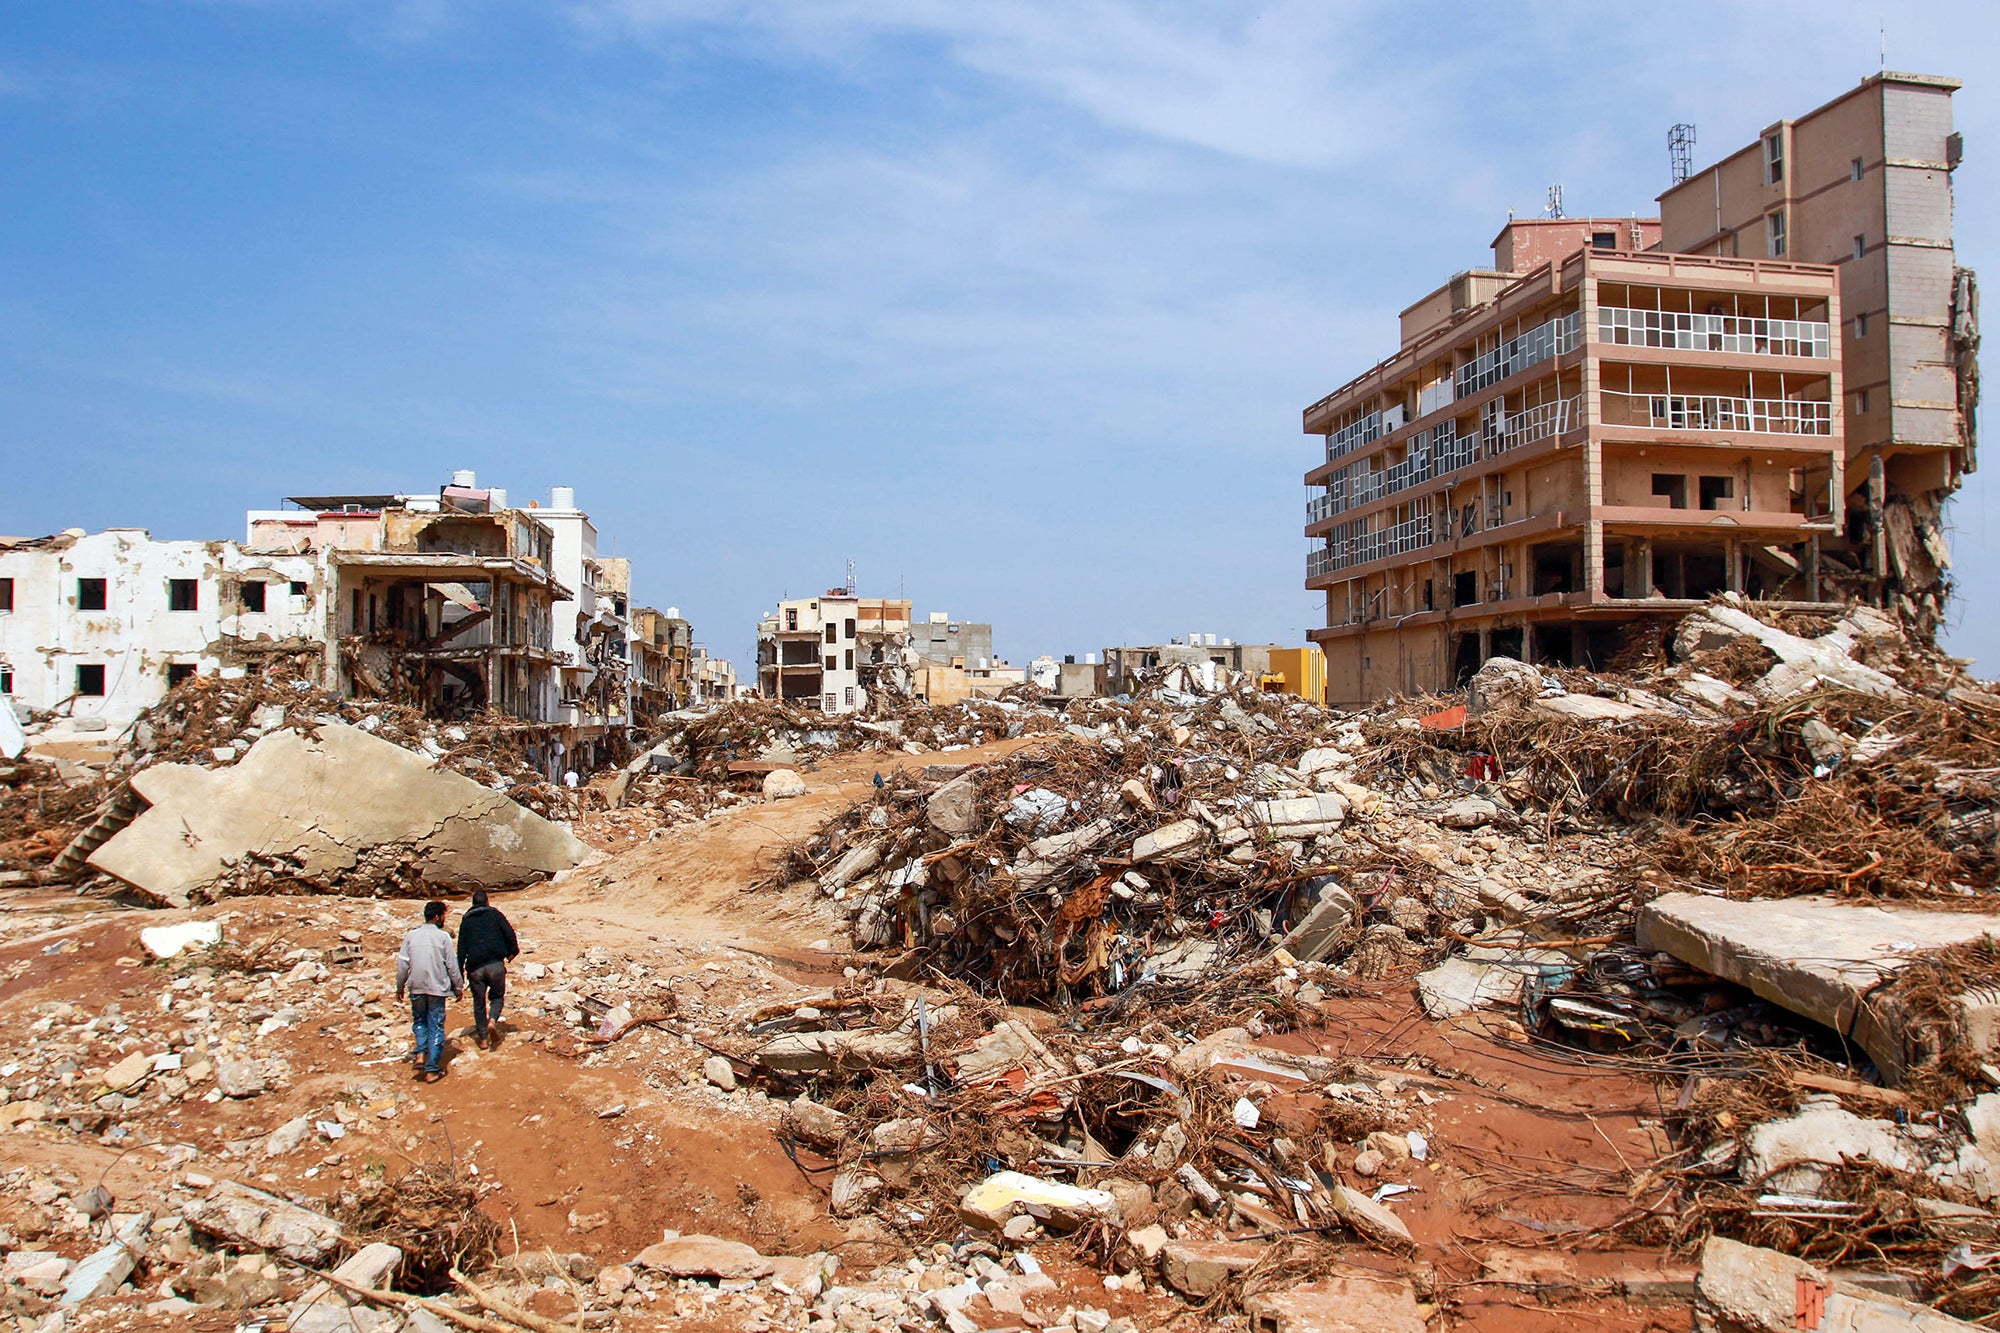 Two men walk through rubble of destroyed buildings in the aftermath of flooding from Storm Daniel in Derna, Libya. The men's comparative small size contrasts and shows the devastating scale of the destruction caused by the flooding